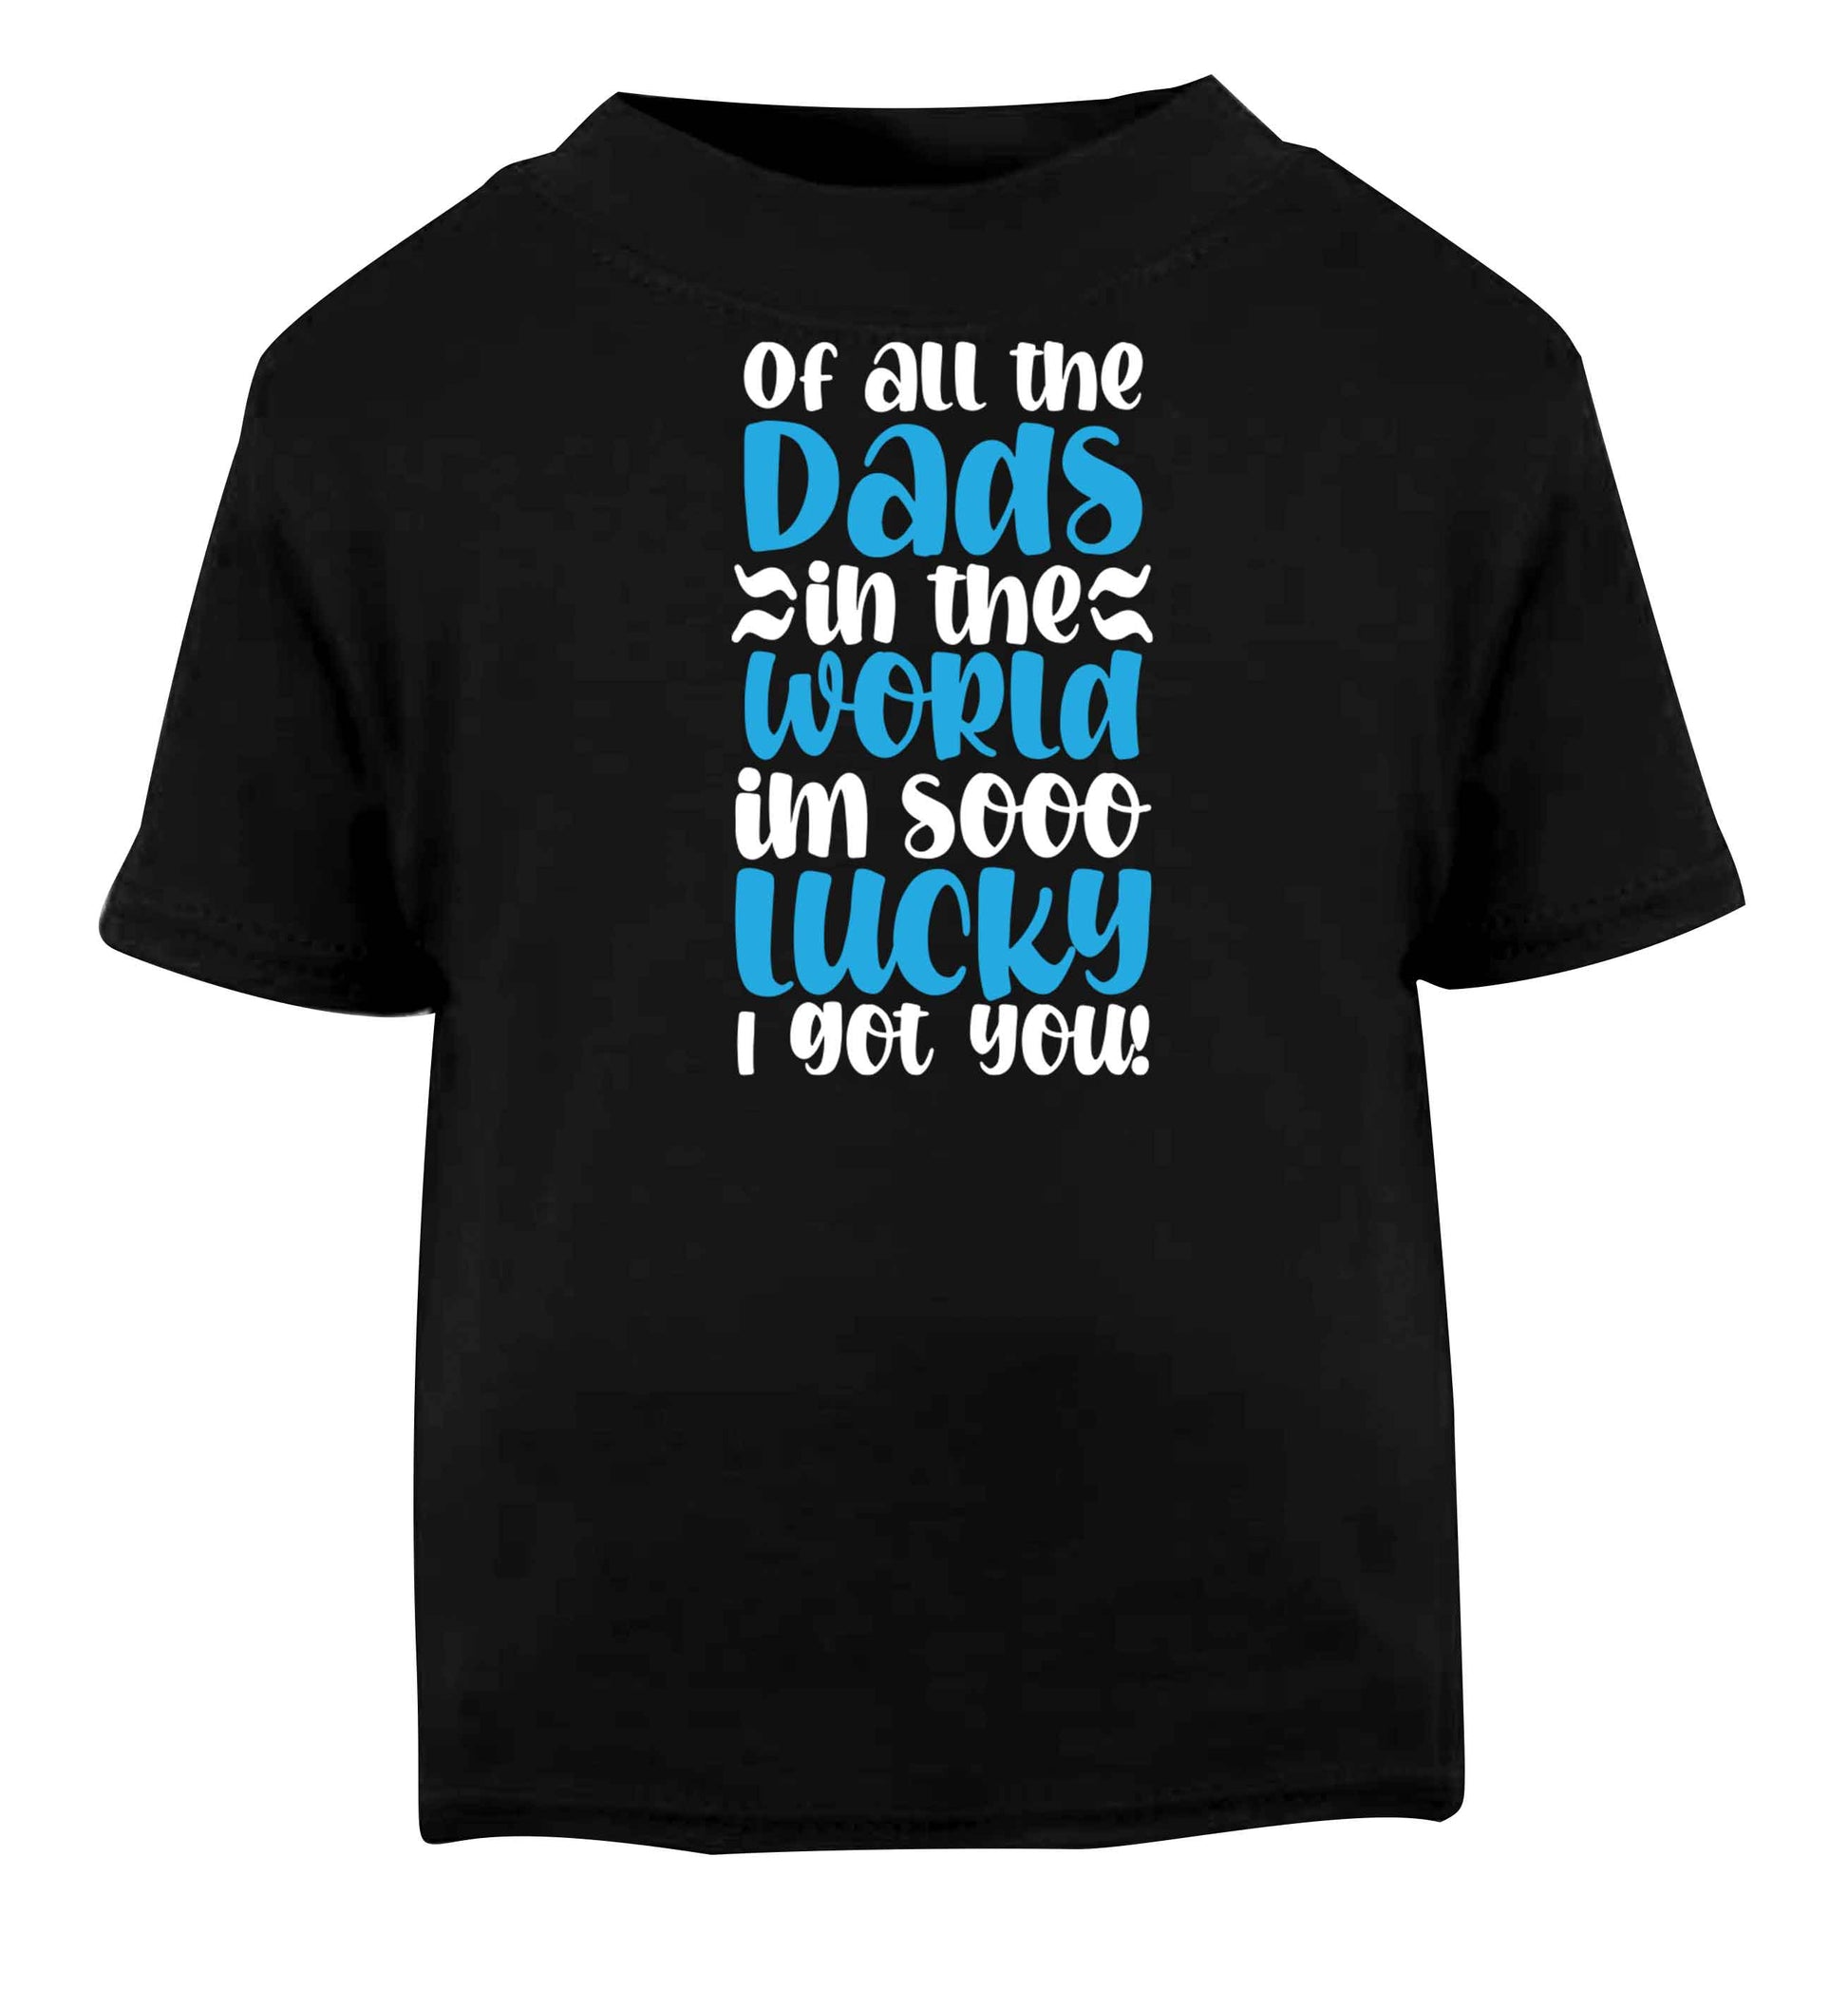 I'm as lucky as can be the worlds greatest dad belongs to me! Black baby toddler Tshirt 2 years